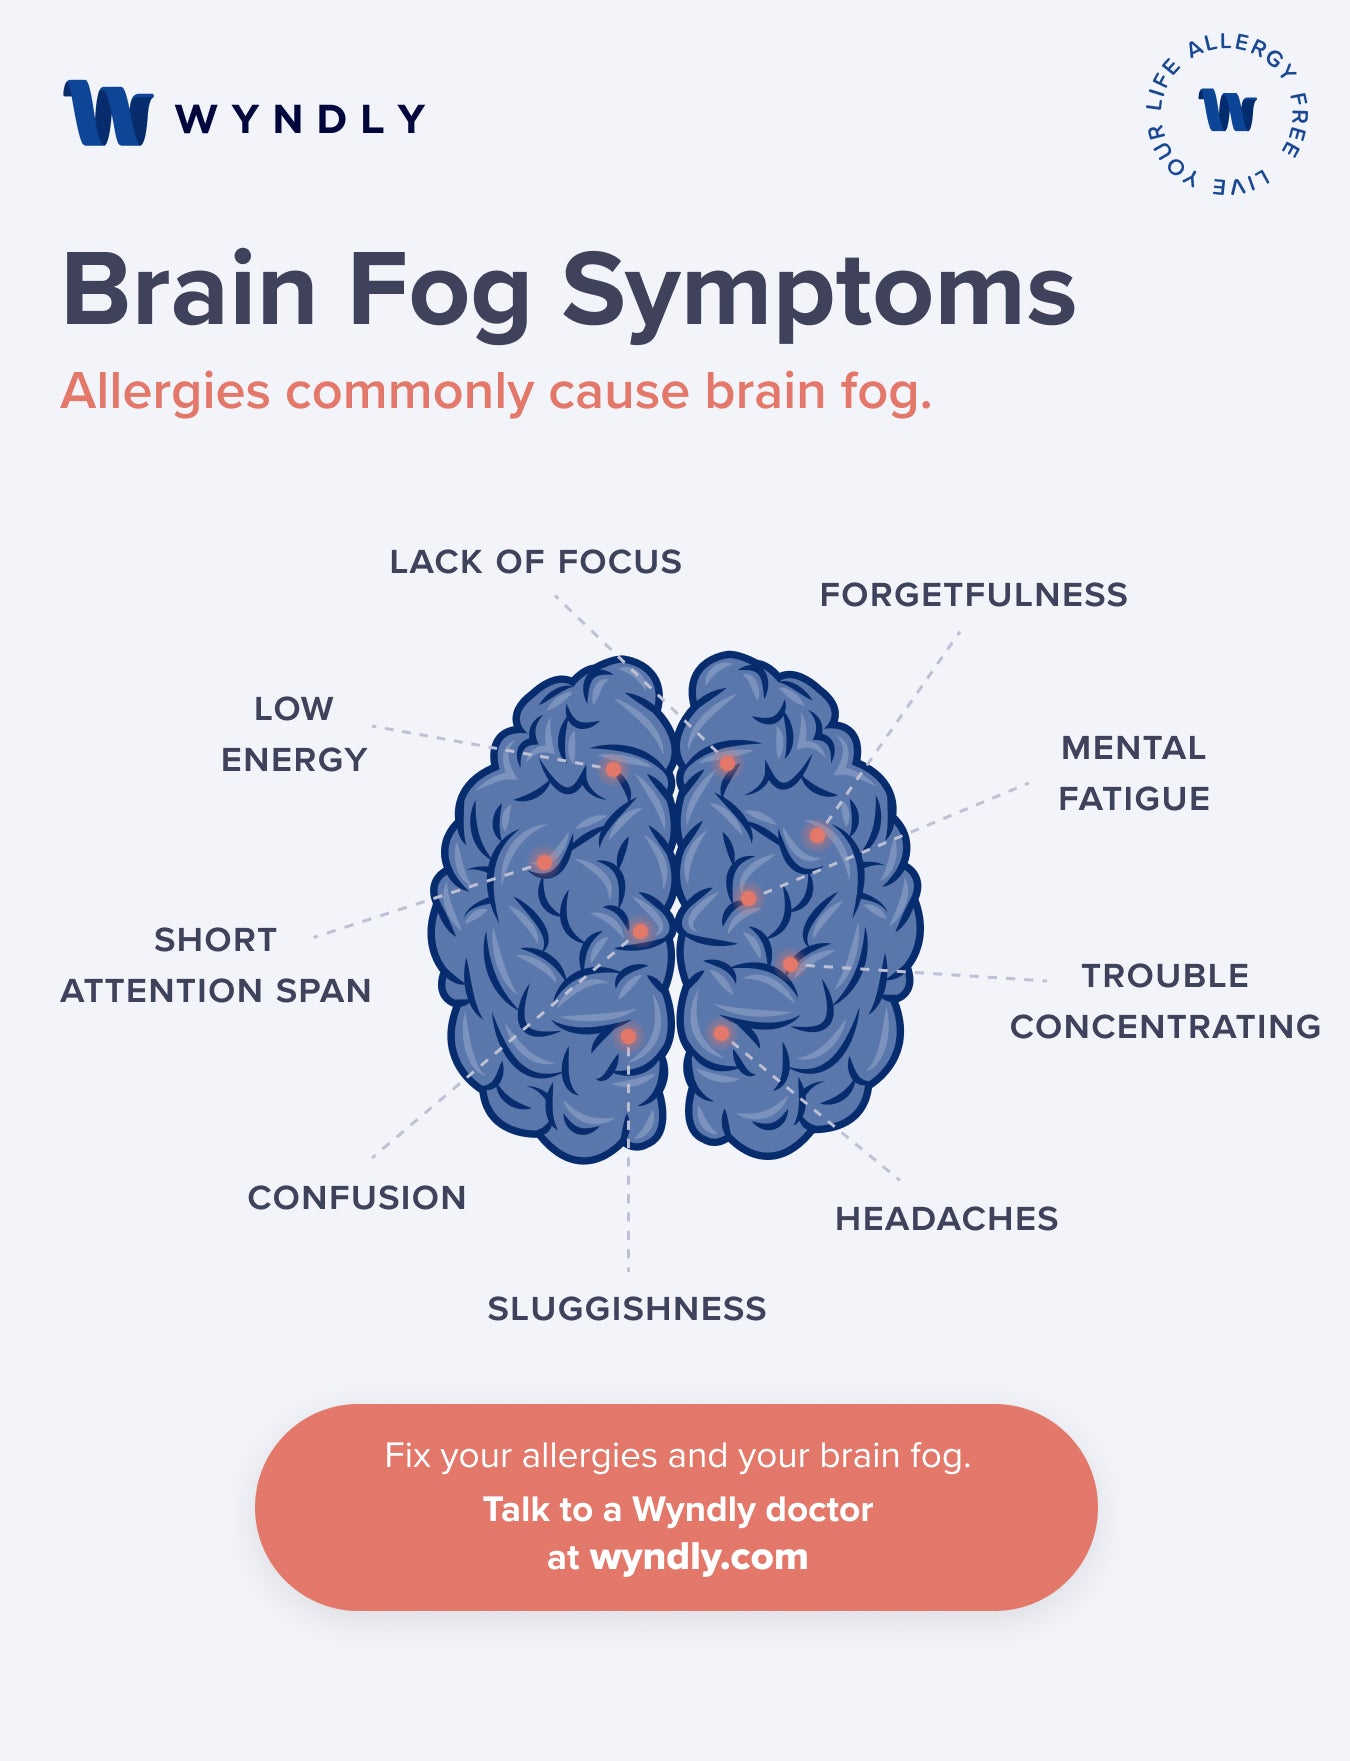 What are the symptoms of brain fog and anxiety? - Quora